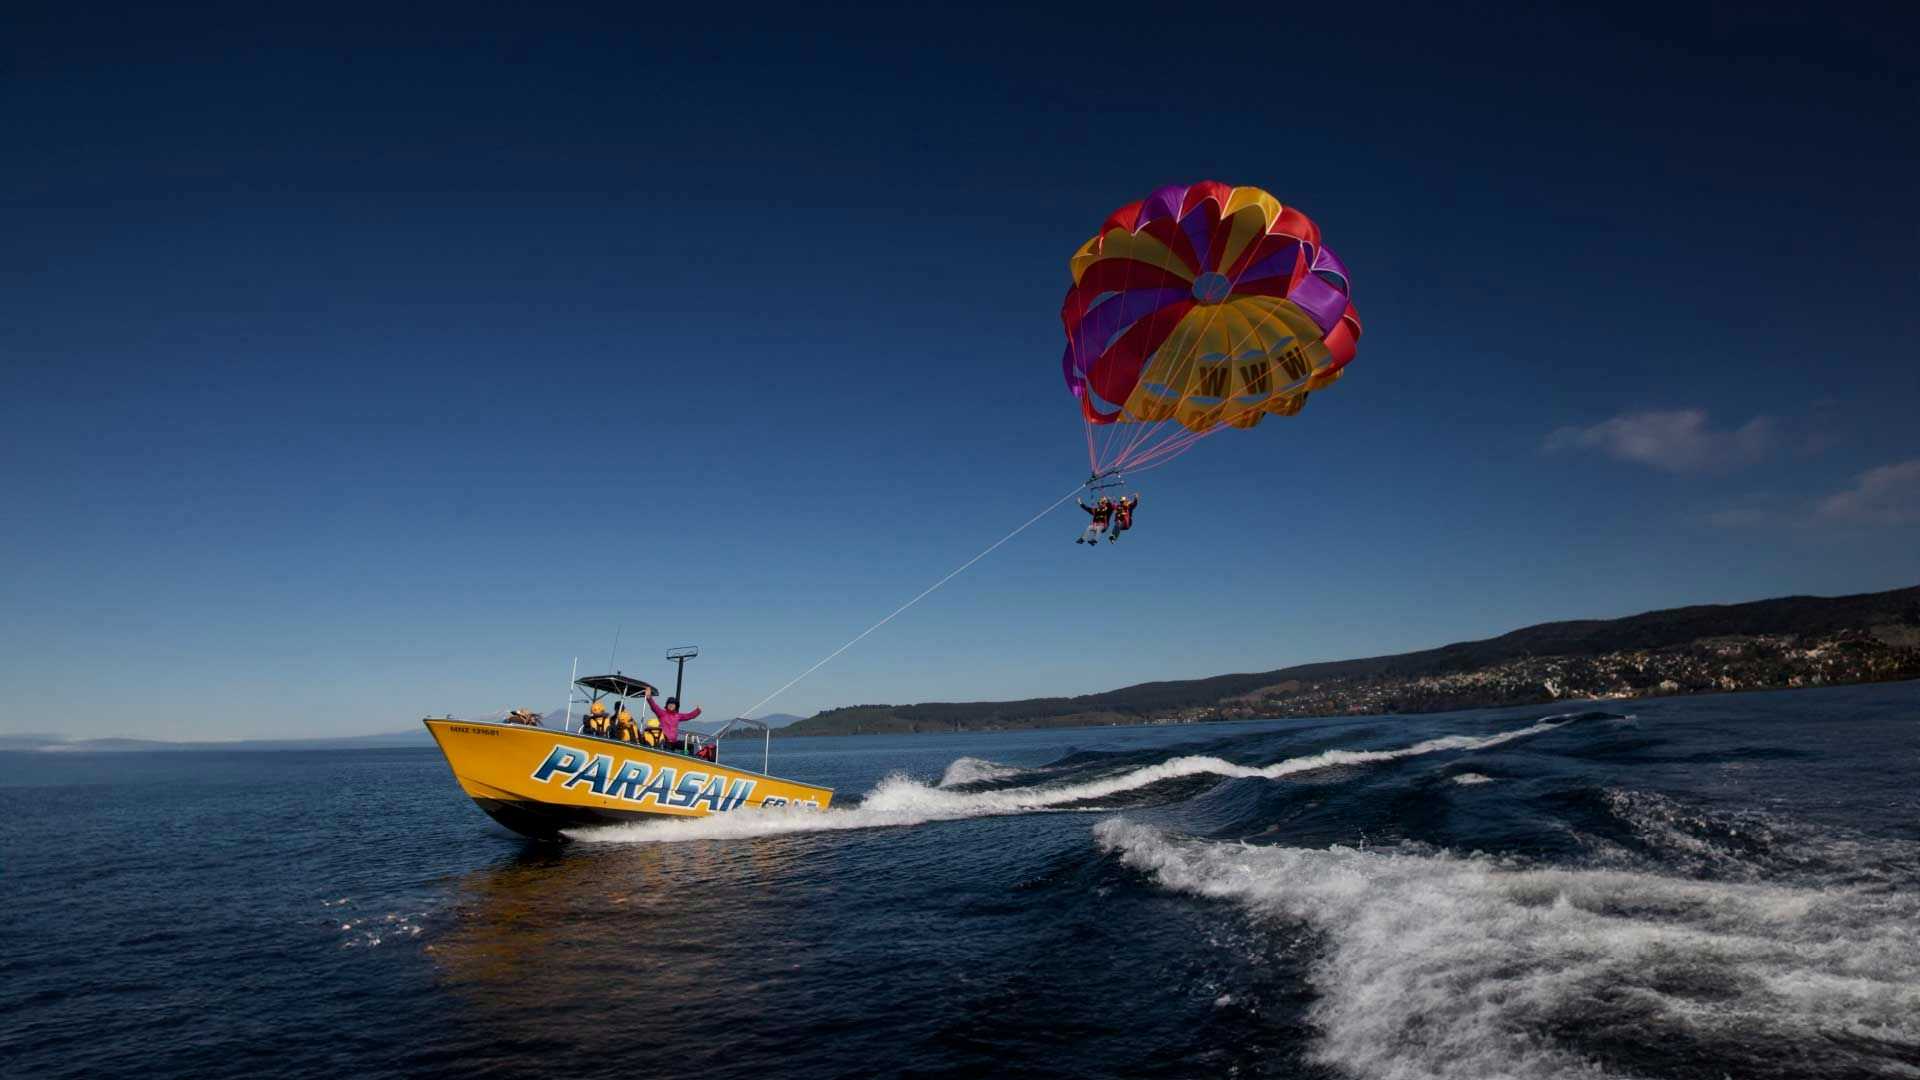 Parasailing on Lake Taupo in New Zealand